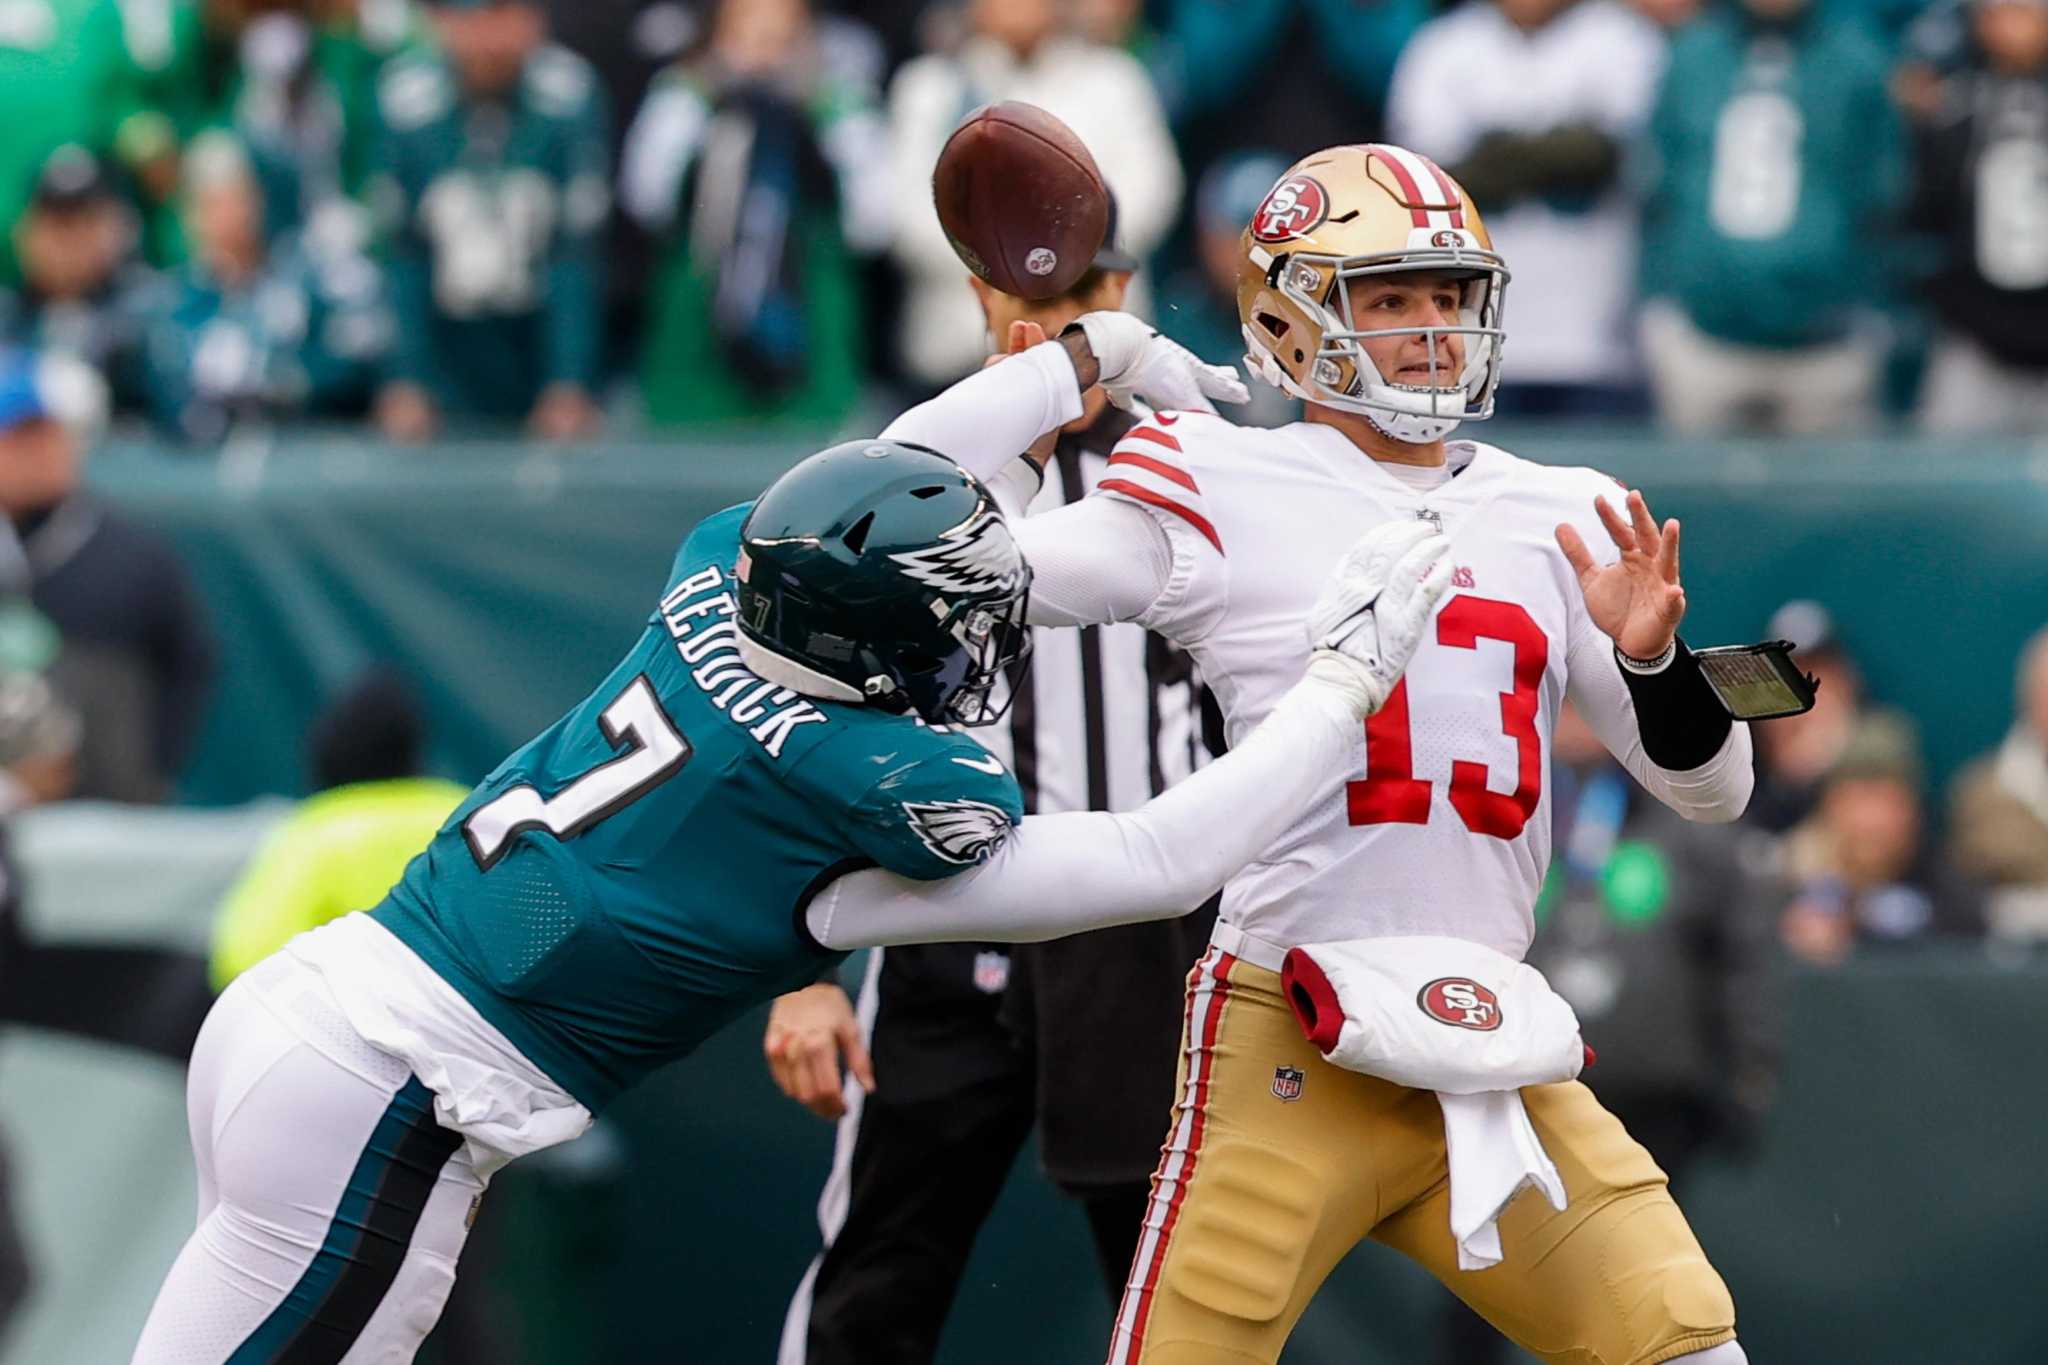 49ers' Brock Purdy injured in NFC title game, questionable to return